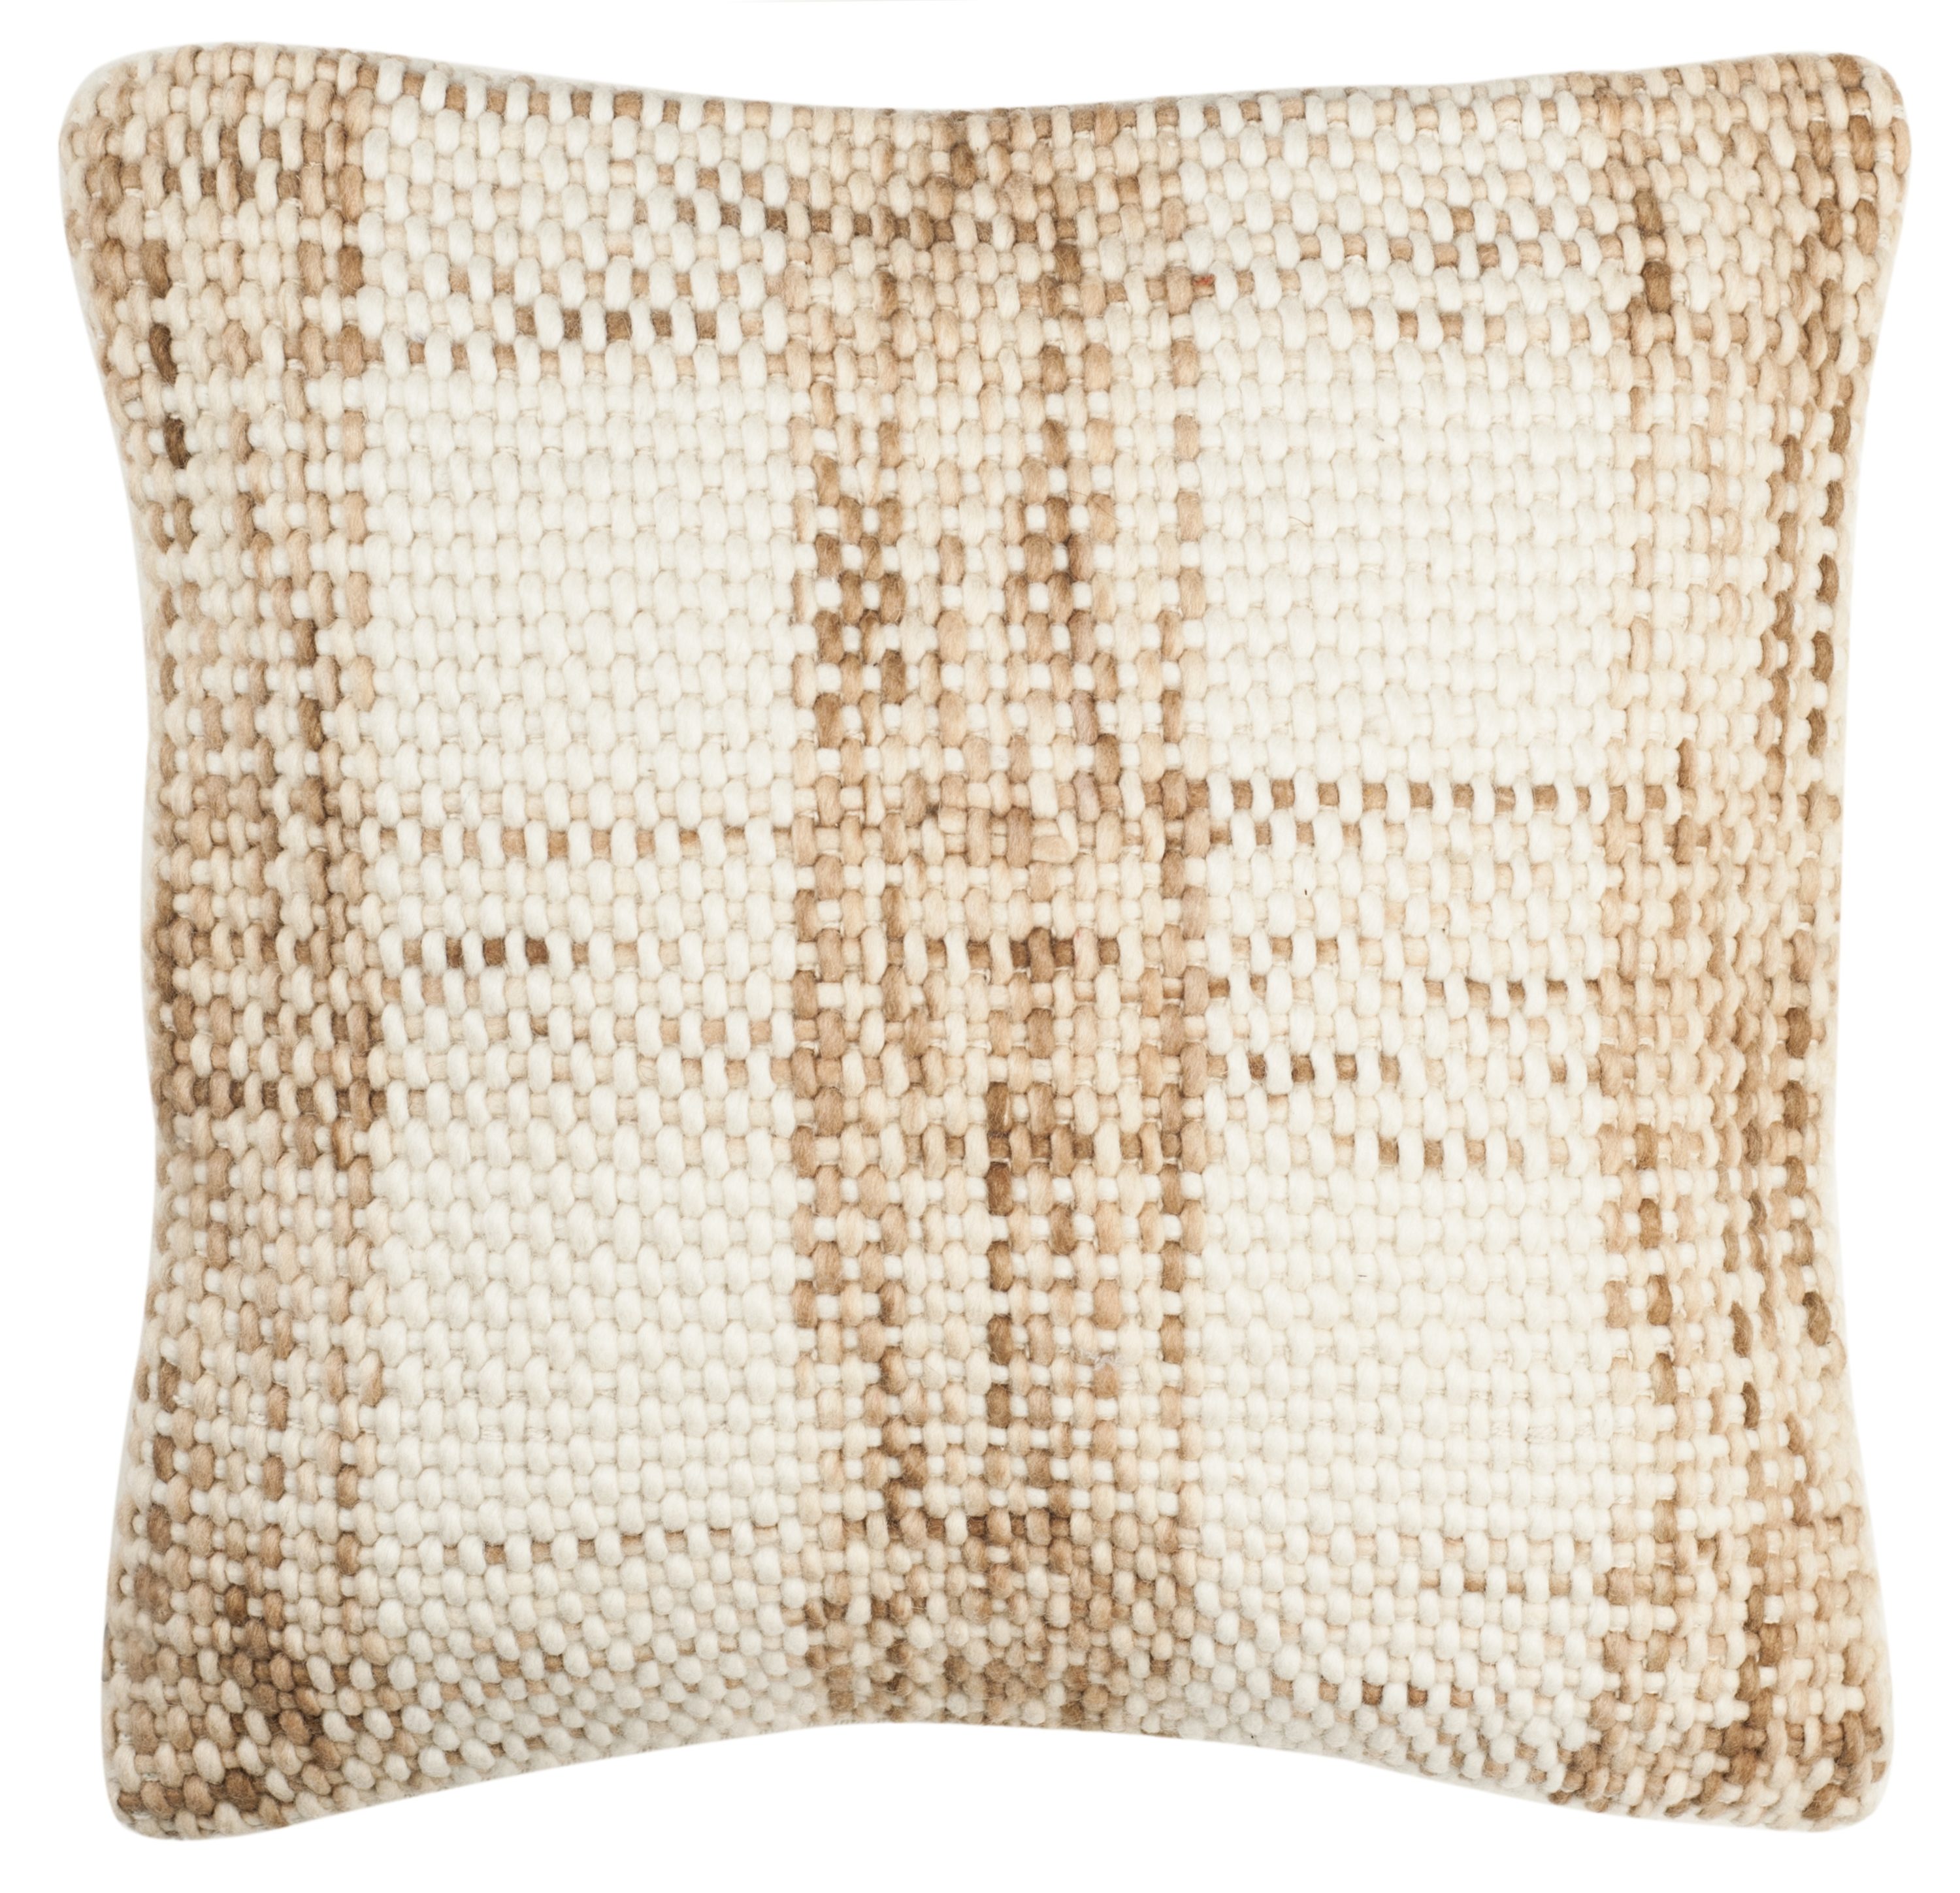 Safavieh Woven Plaid 20-in x 20-in Eggshell Blend Handloom Wool Indoor Decorative Pillow Polyester in Brown | PLS109B-2020